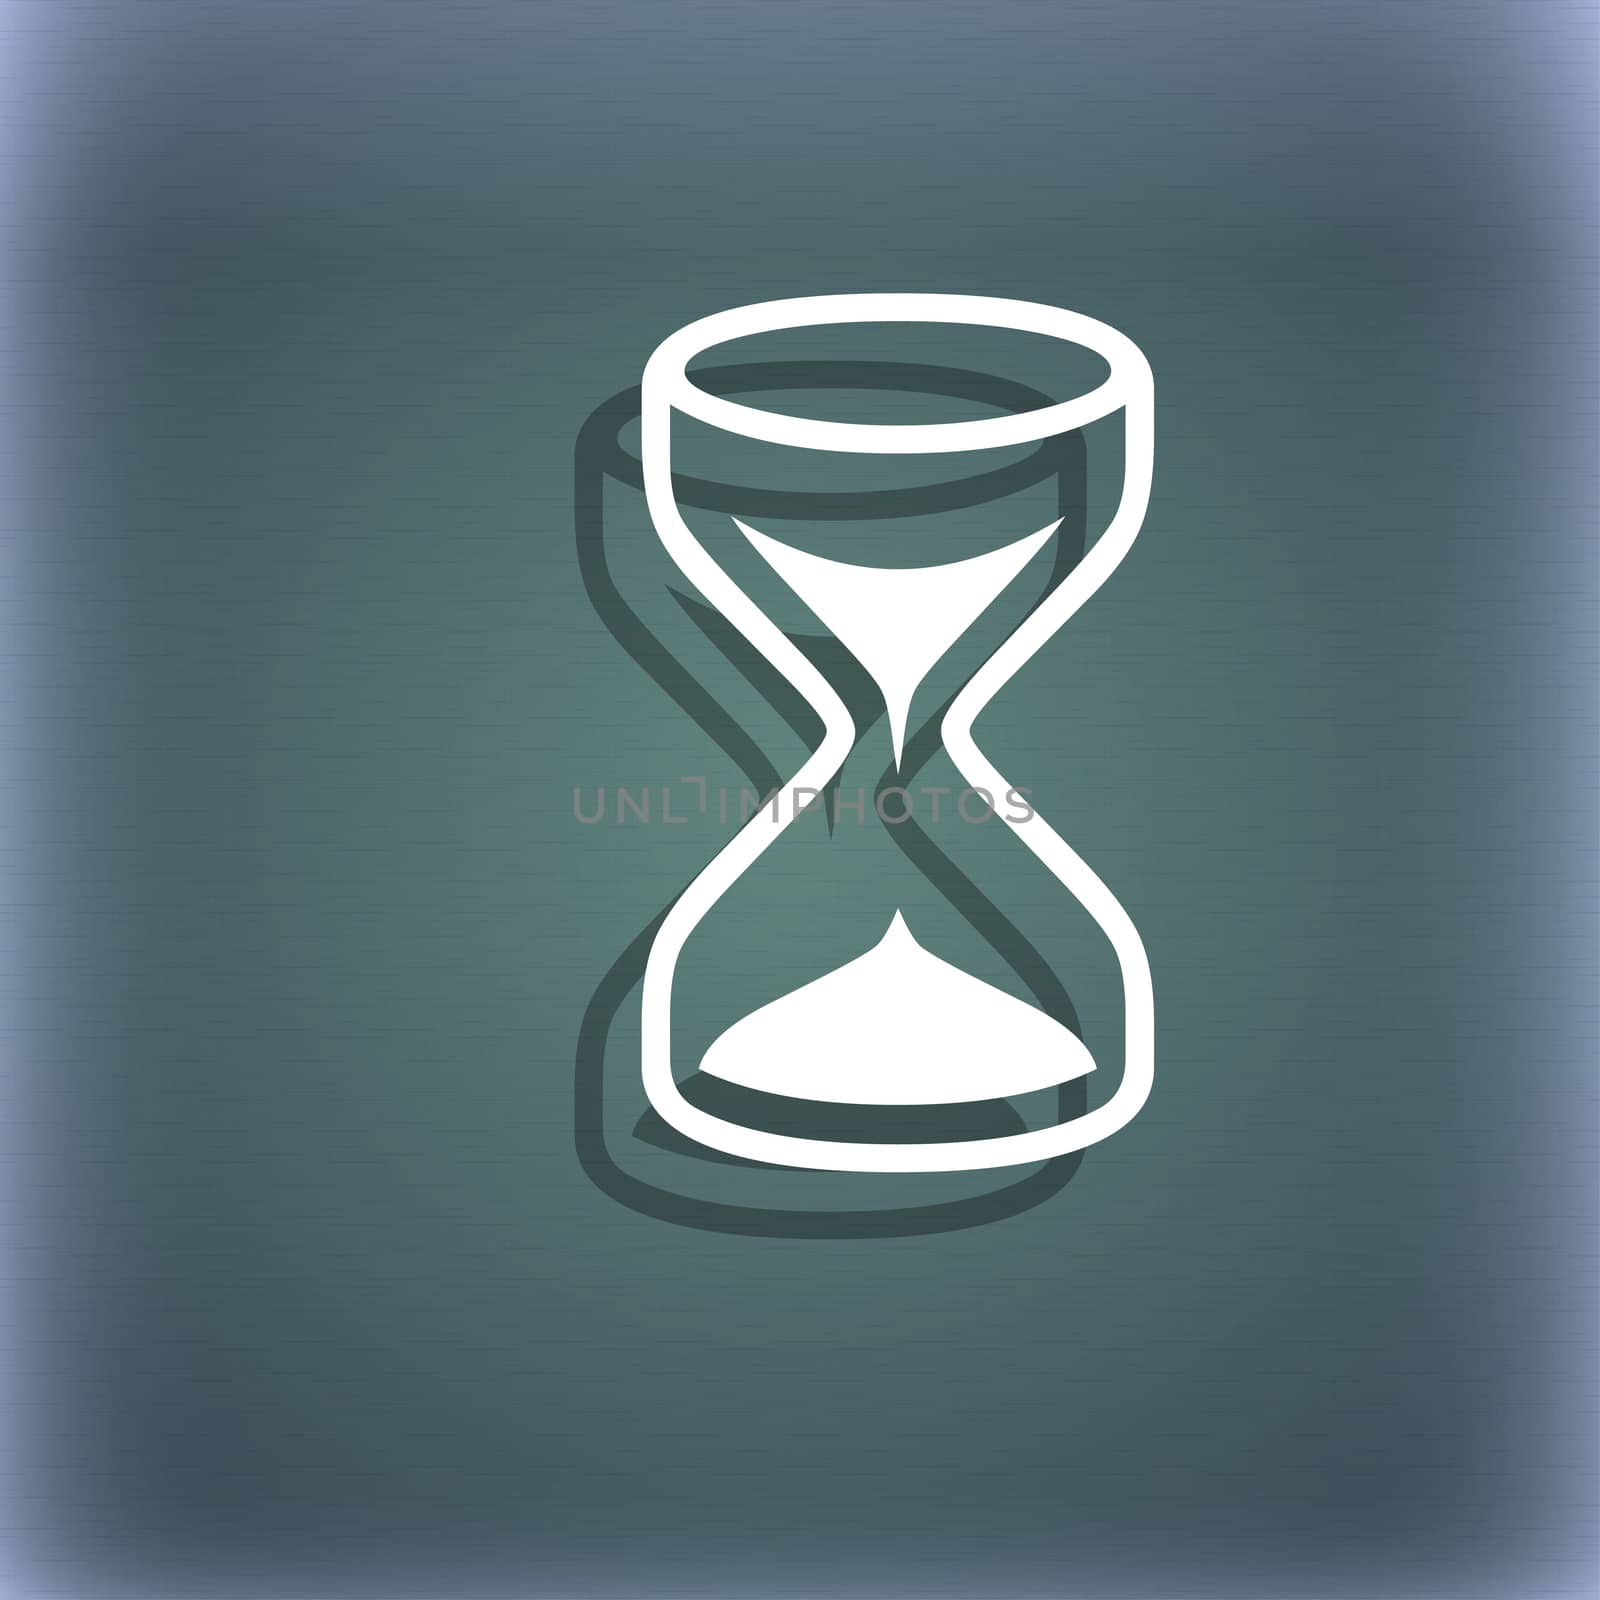 Hourglass sign icon. Sand timer symbol. On the blue-green abstract background with shadow and space for your text.  by serhii_lohvyniuk